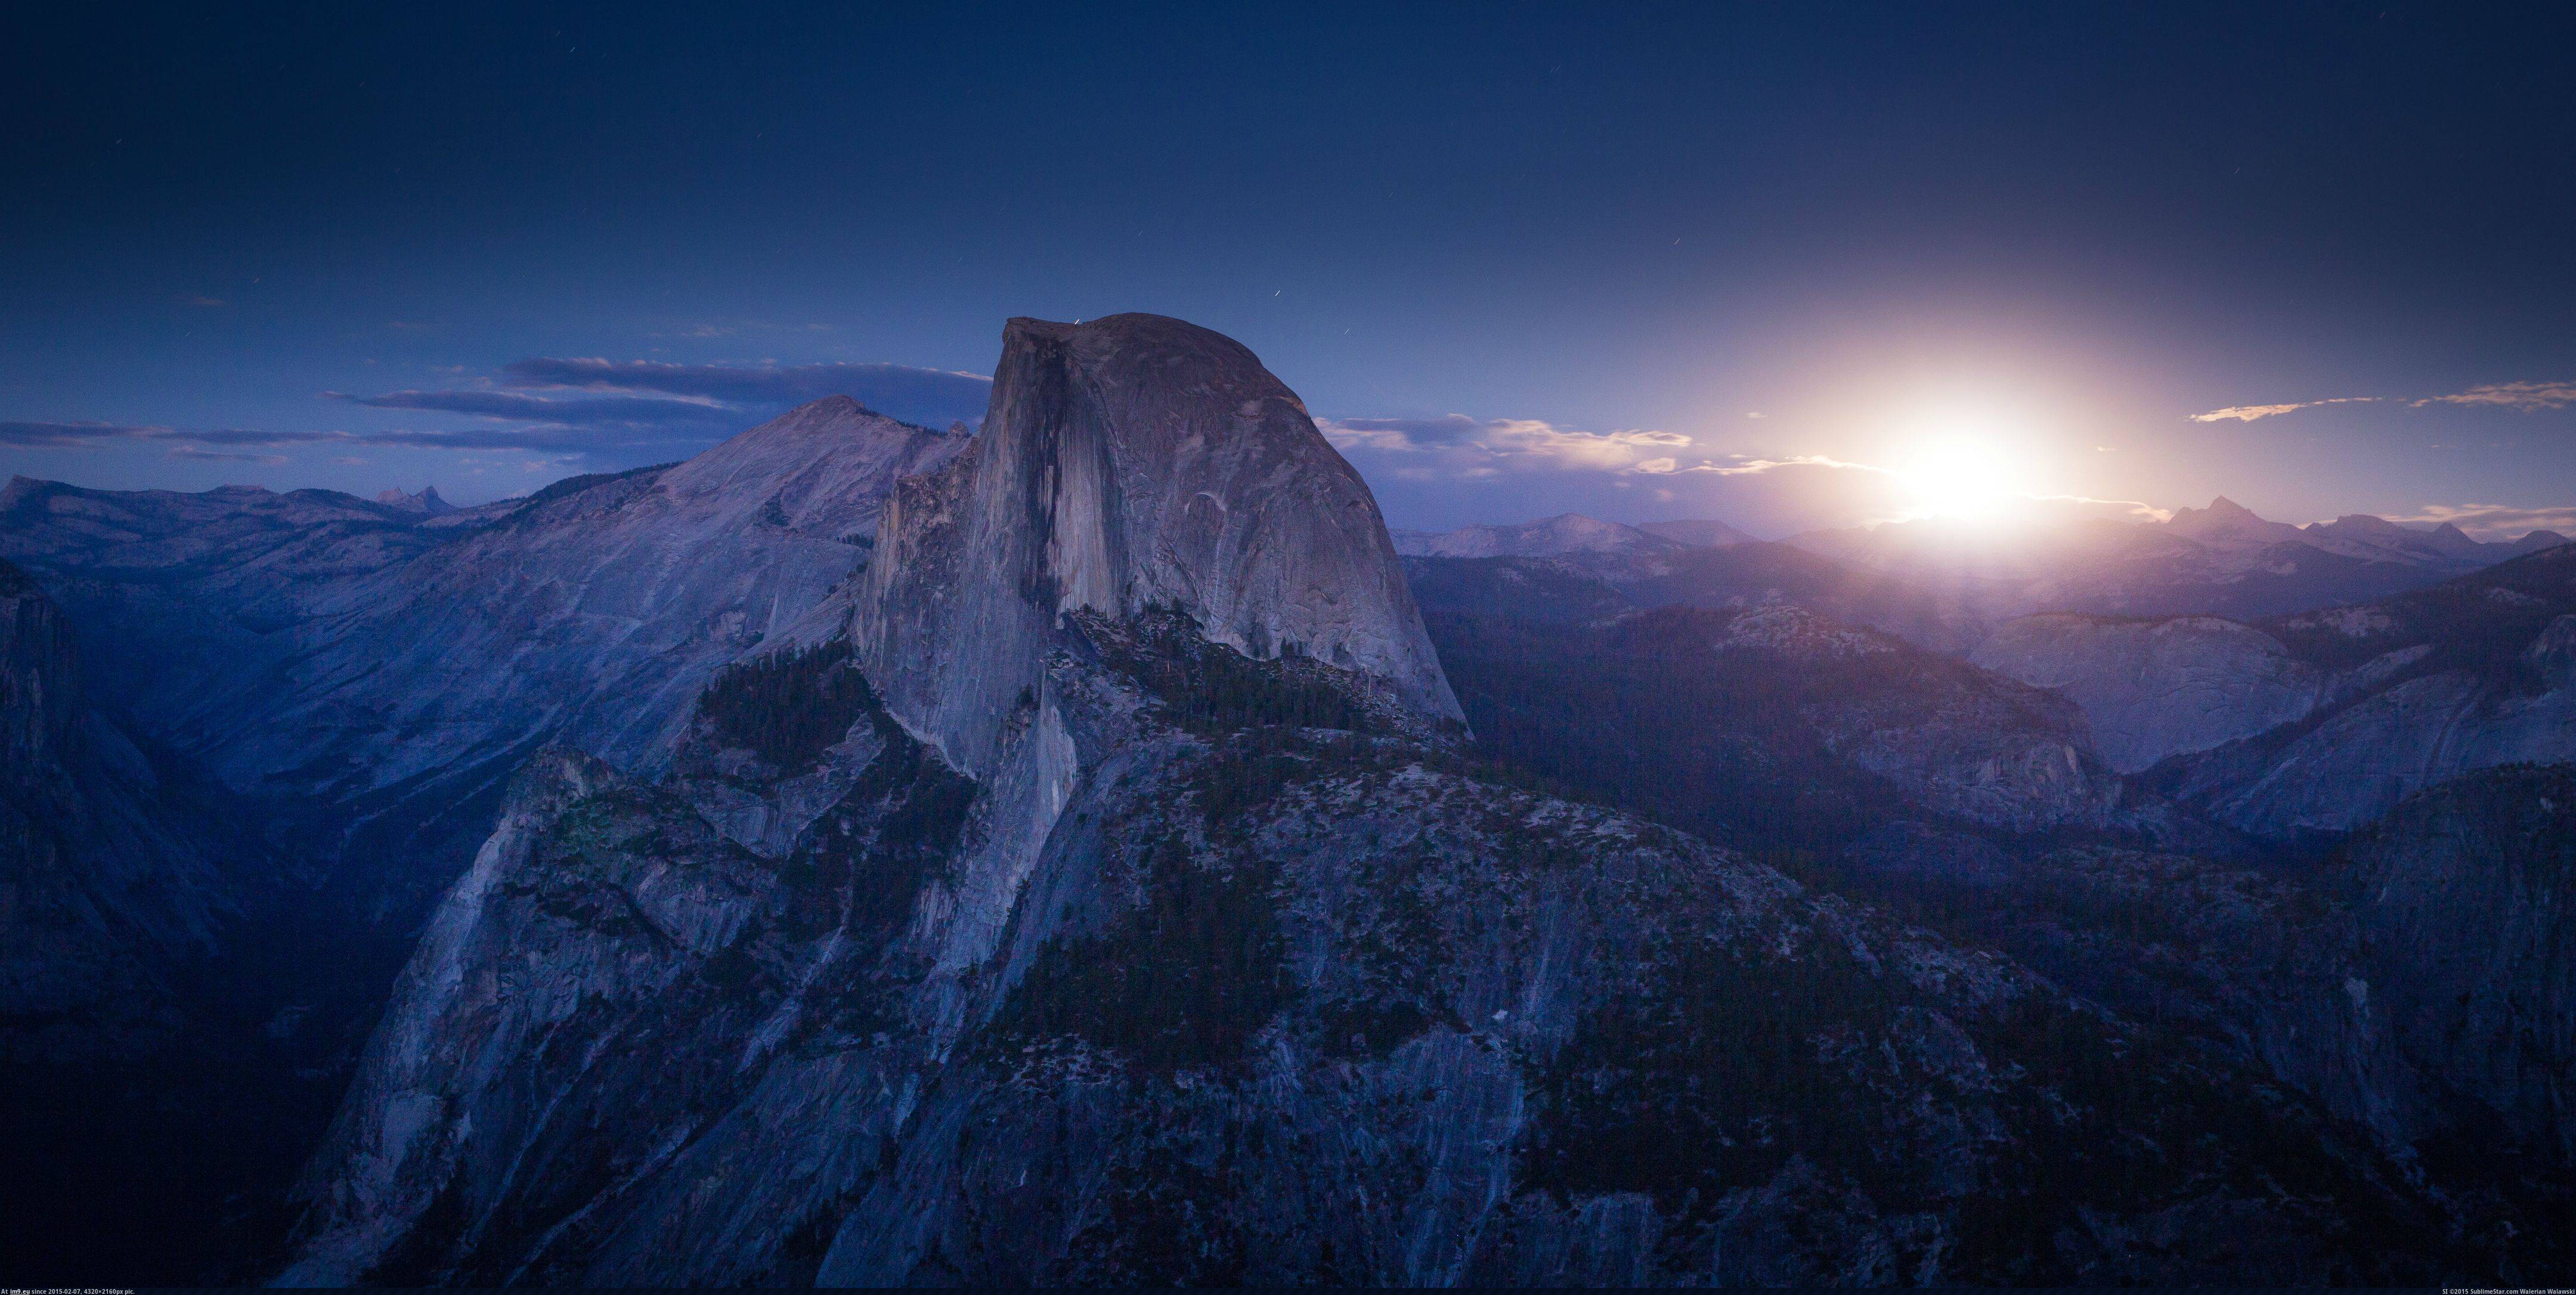 #Wallpaper #Big #Beautiful #Mountains #Highres #Moonrise #4320x2172 #Yosemite #Moon #Blood #Peace [Earthporn] OC - 'Blood Moonrise' - Yosemite During the Big Blood Moon on 10-8-14 -[4320x2160] Pic. (Image of album My r/EARTHPORN favs))